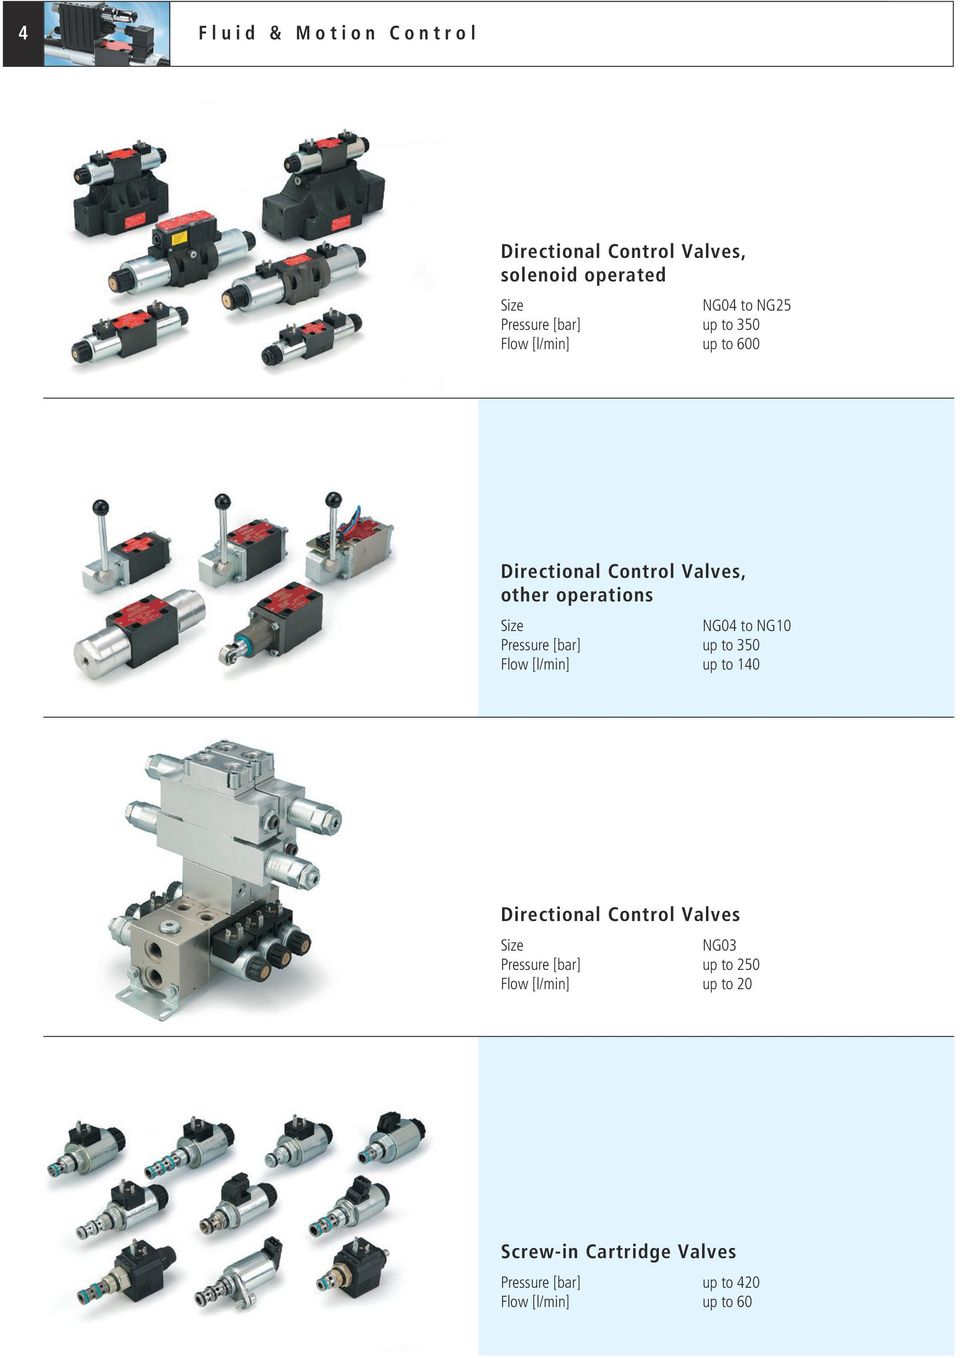 NG10 Pressure [bar] up to 350 Flow [l/min] up to 140 Directional Control Valves Size NG03 Pressure